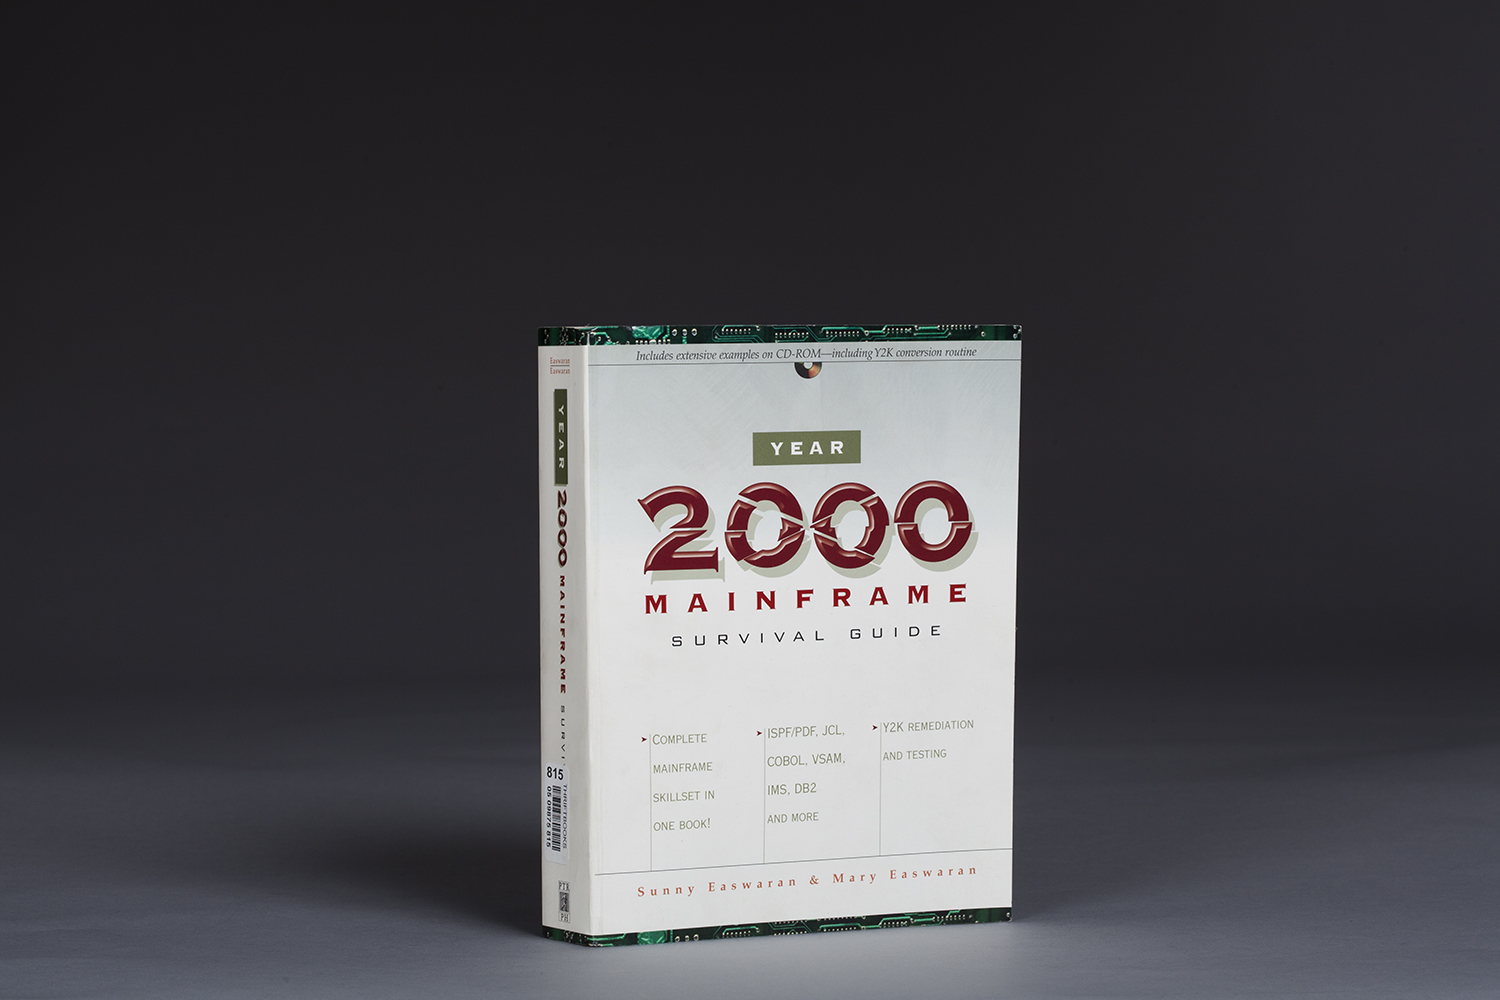 Year 2000 Mainframe Survival Guide - 0135 Cover.jpg